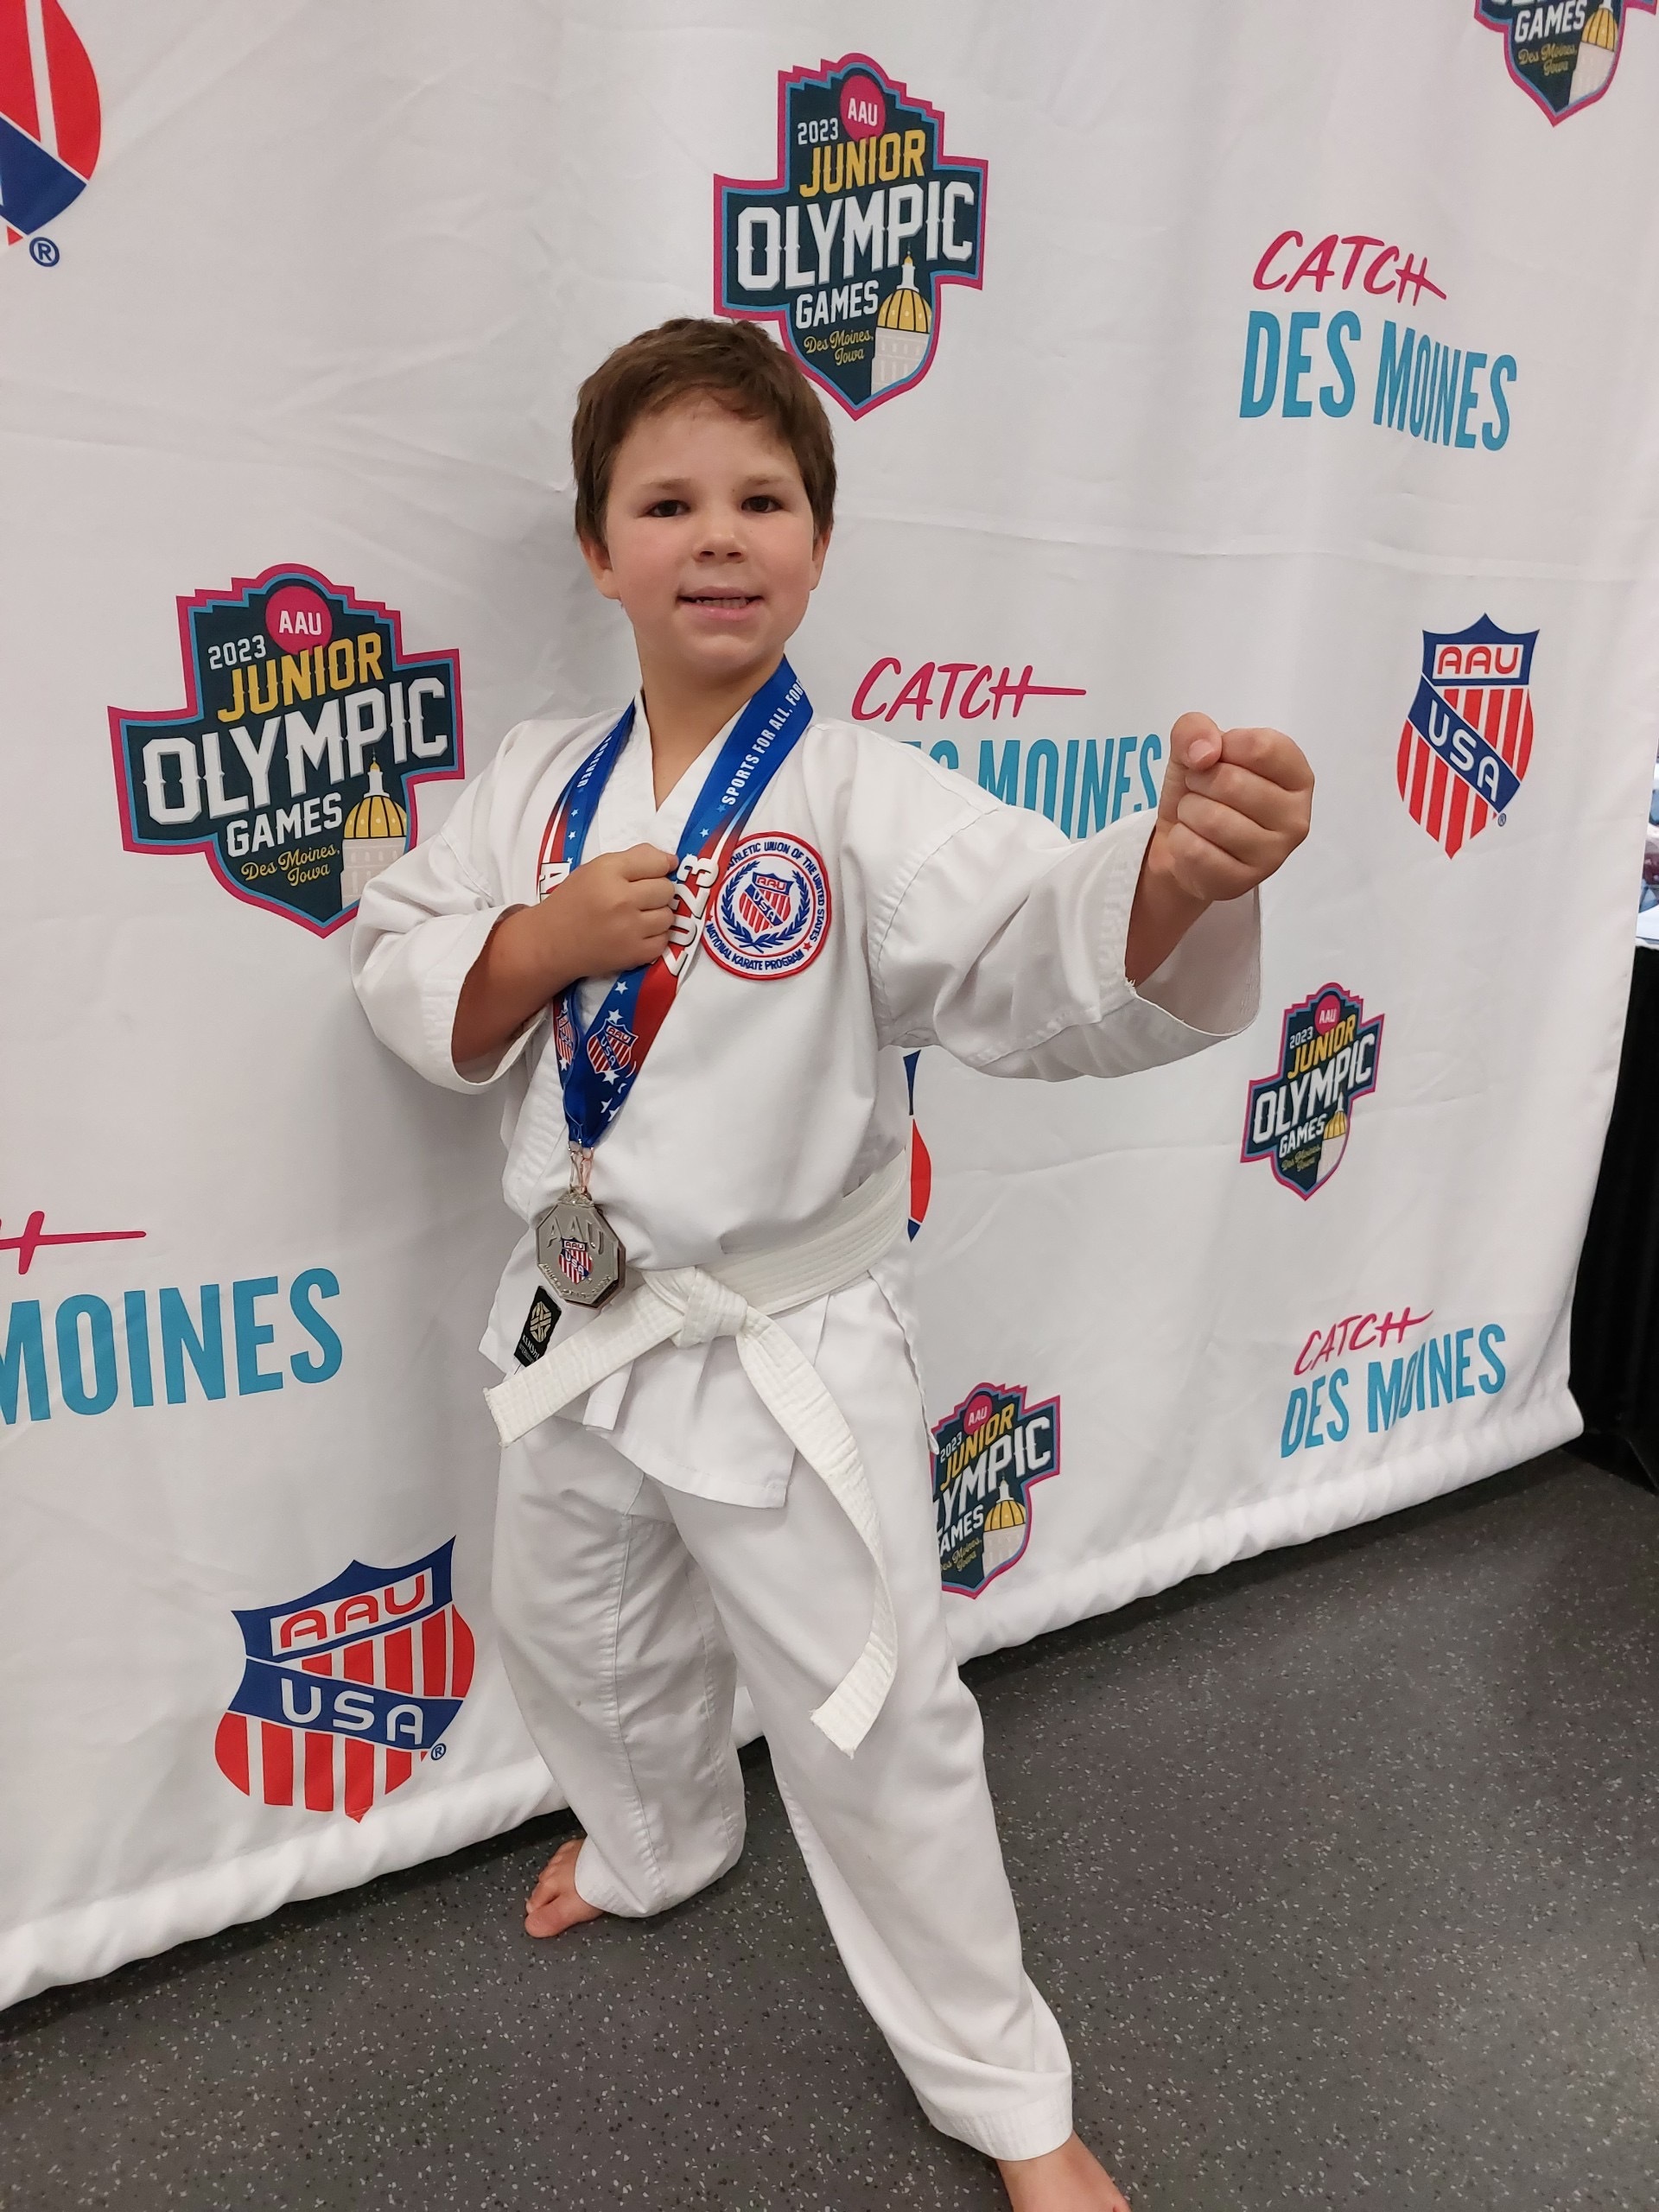 Three Marengo boys competed, won medals in AAU Junior Olympic Games in Iowa 